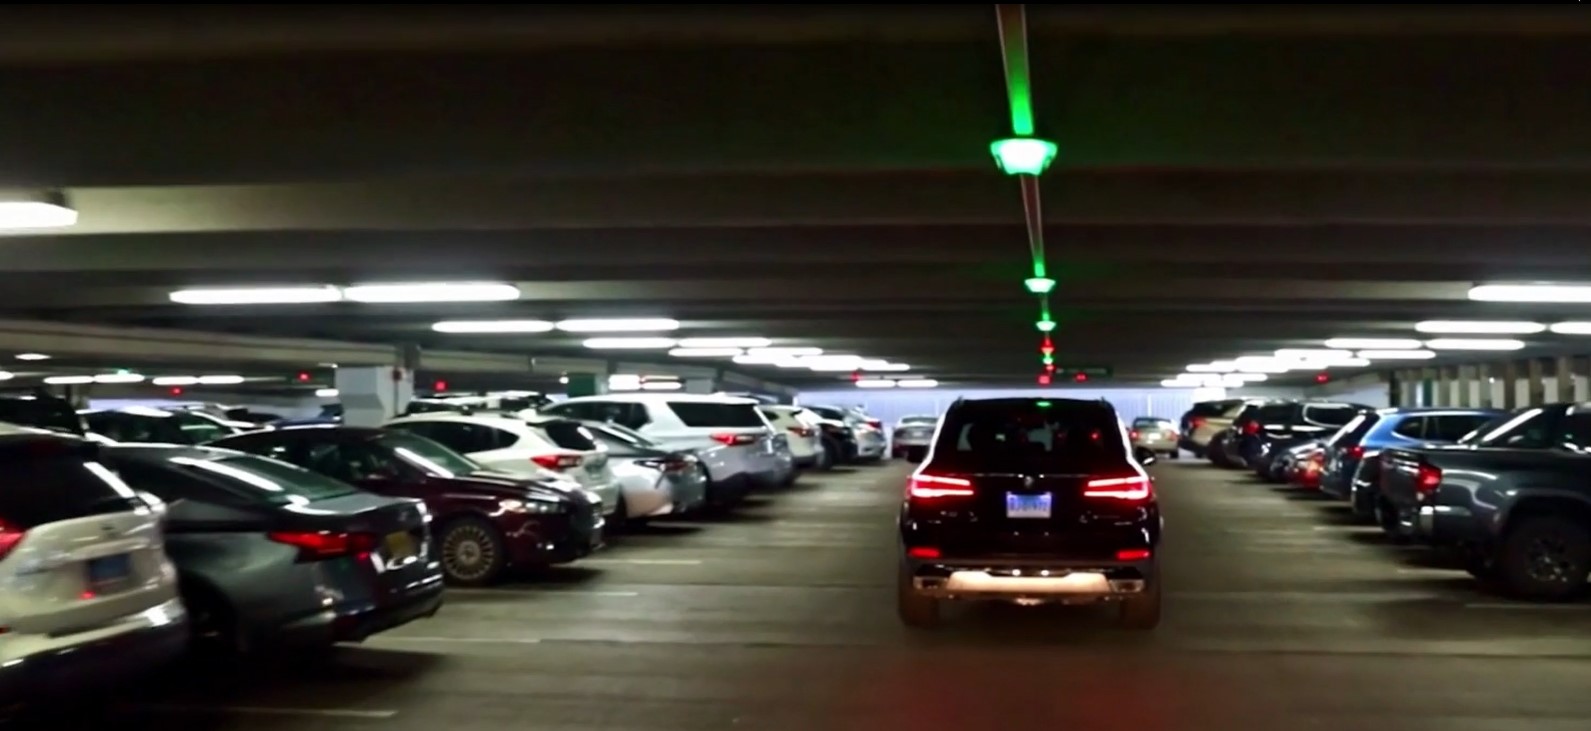 Using an automated parking guidance system (APGS), owners and operators can maximize their parking garage revenue